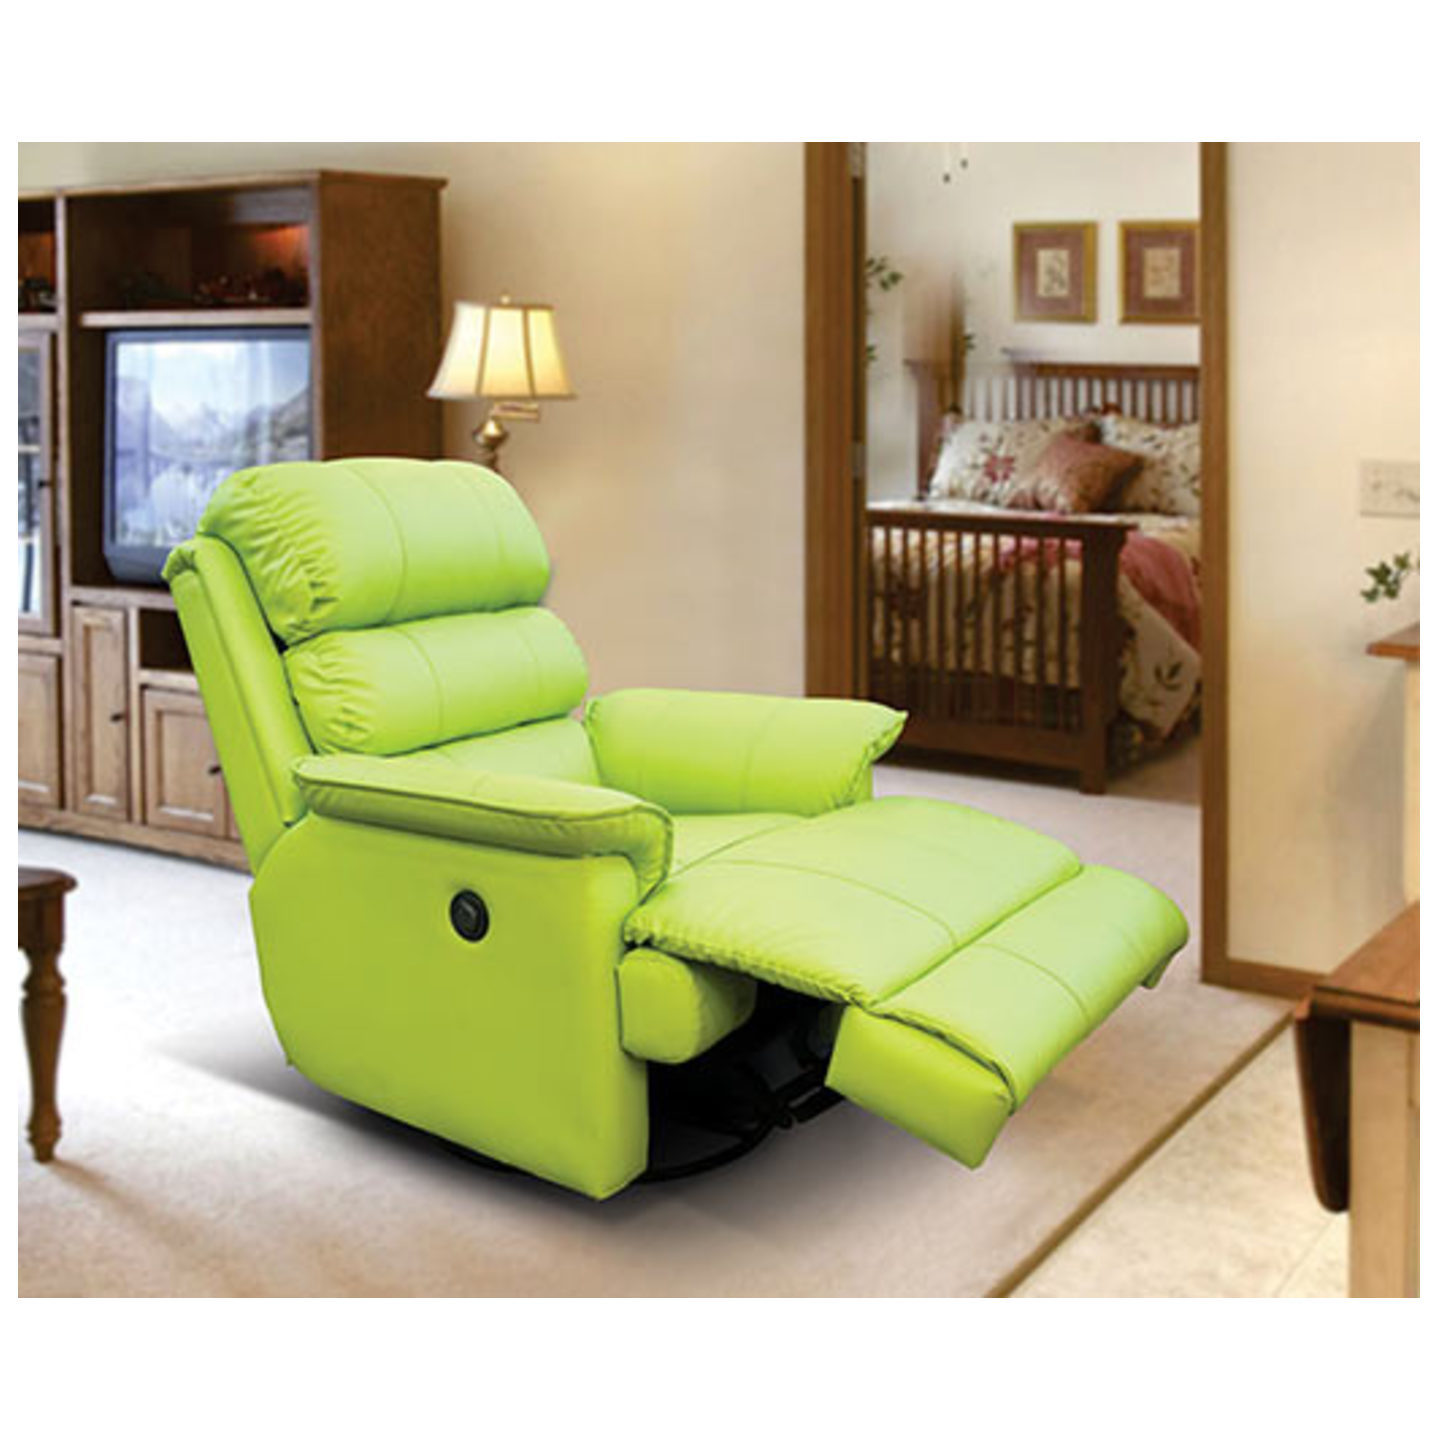 LN Recliner Chair Quies Manual System